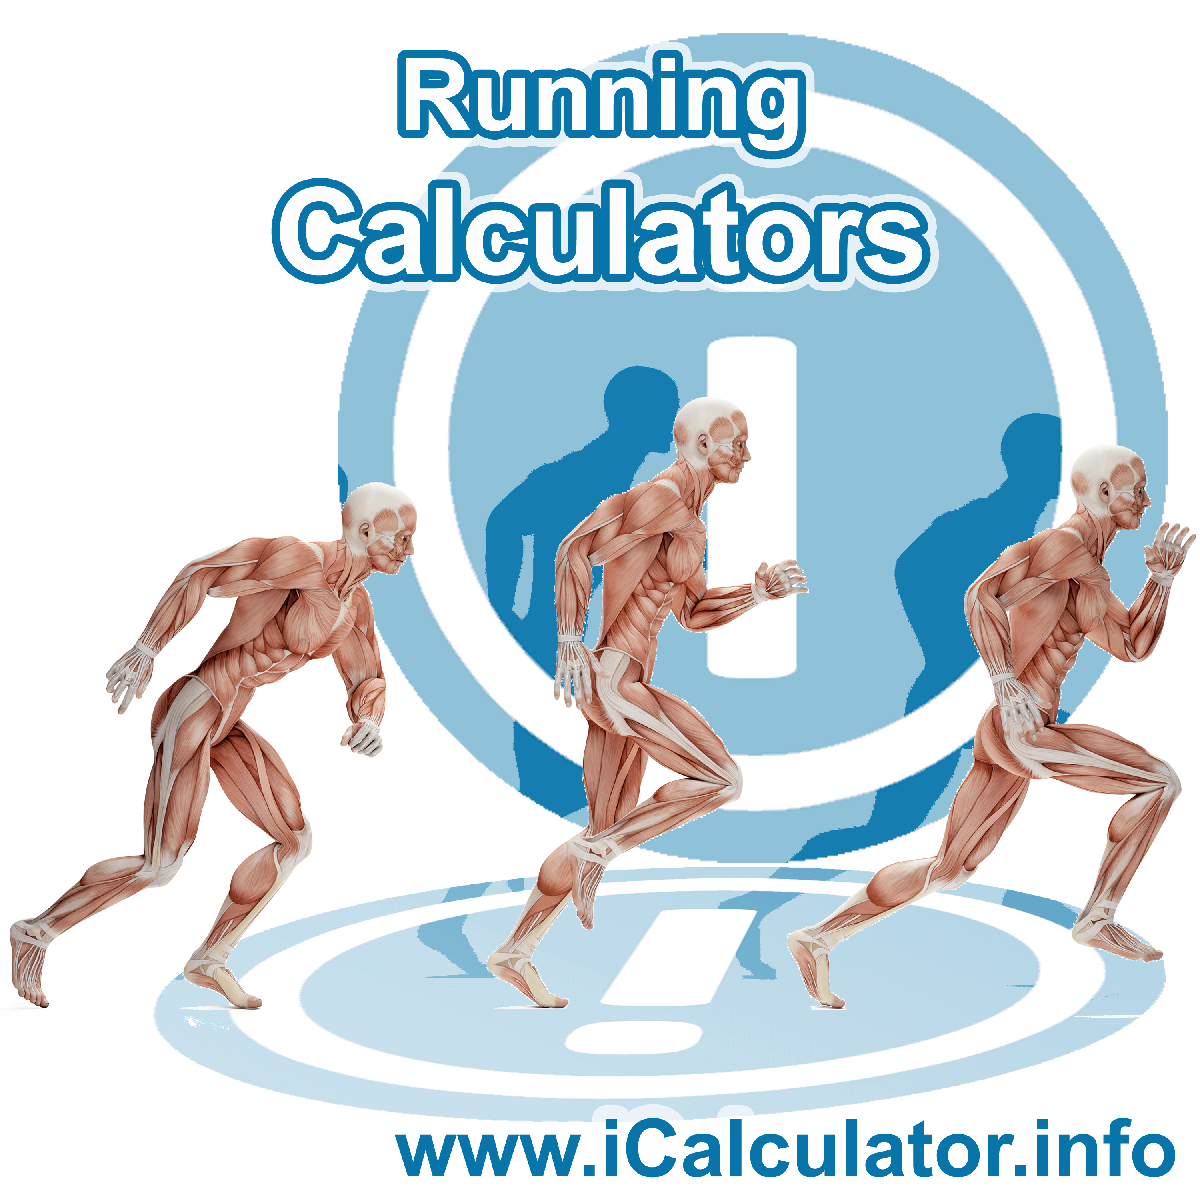 Running Calculator. This image shows an Running player playing running - by iCalculator